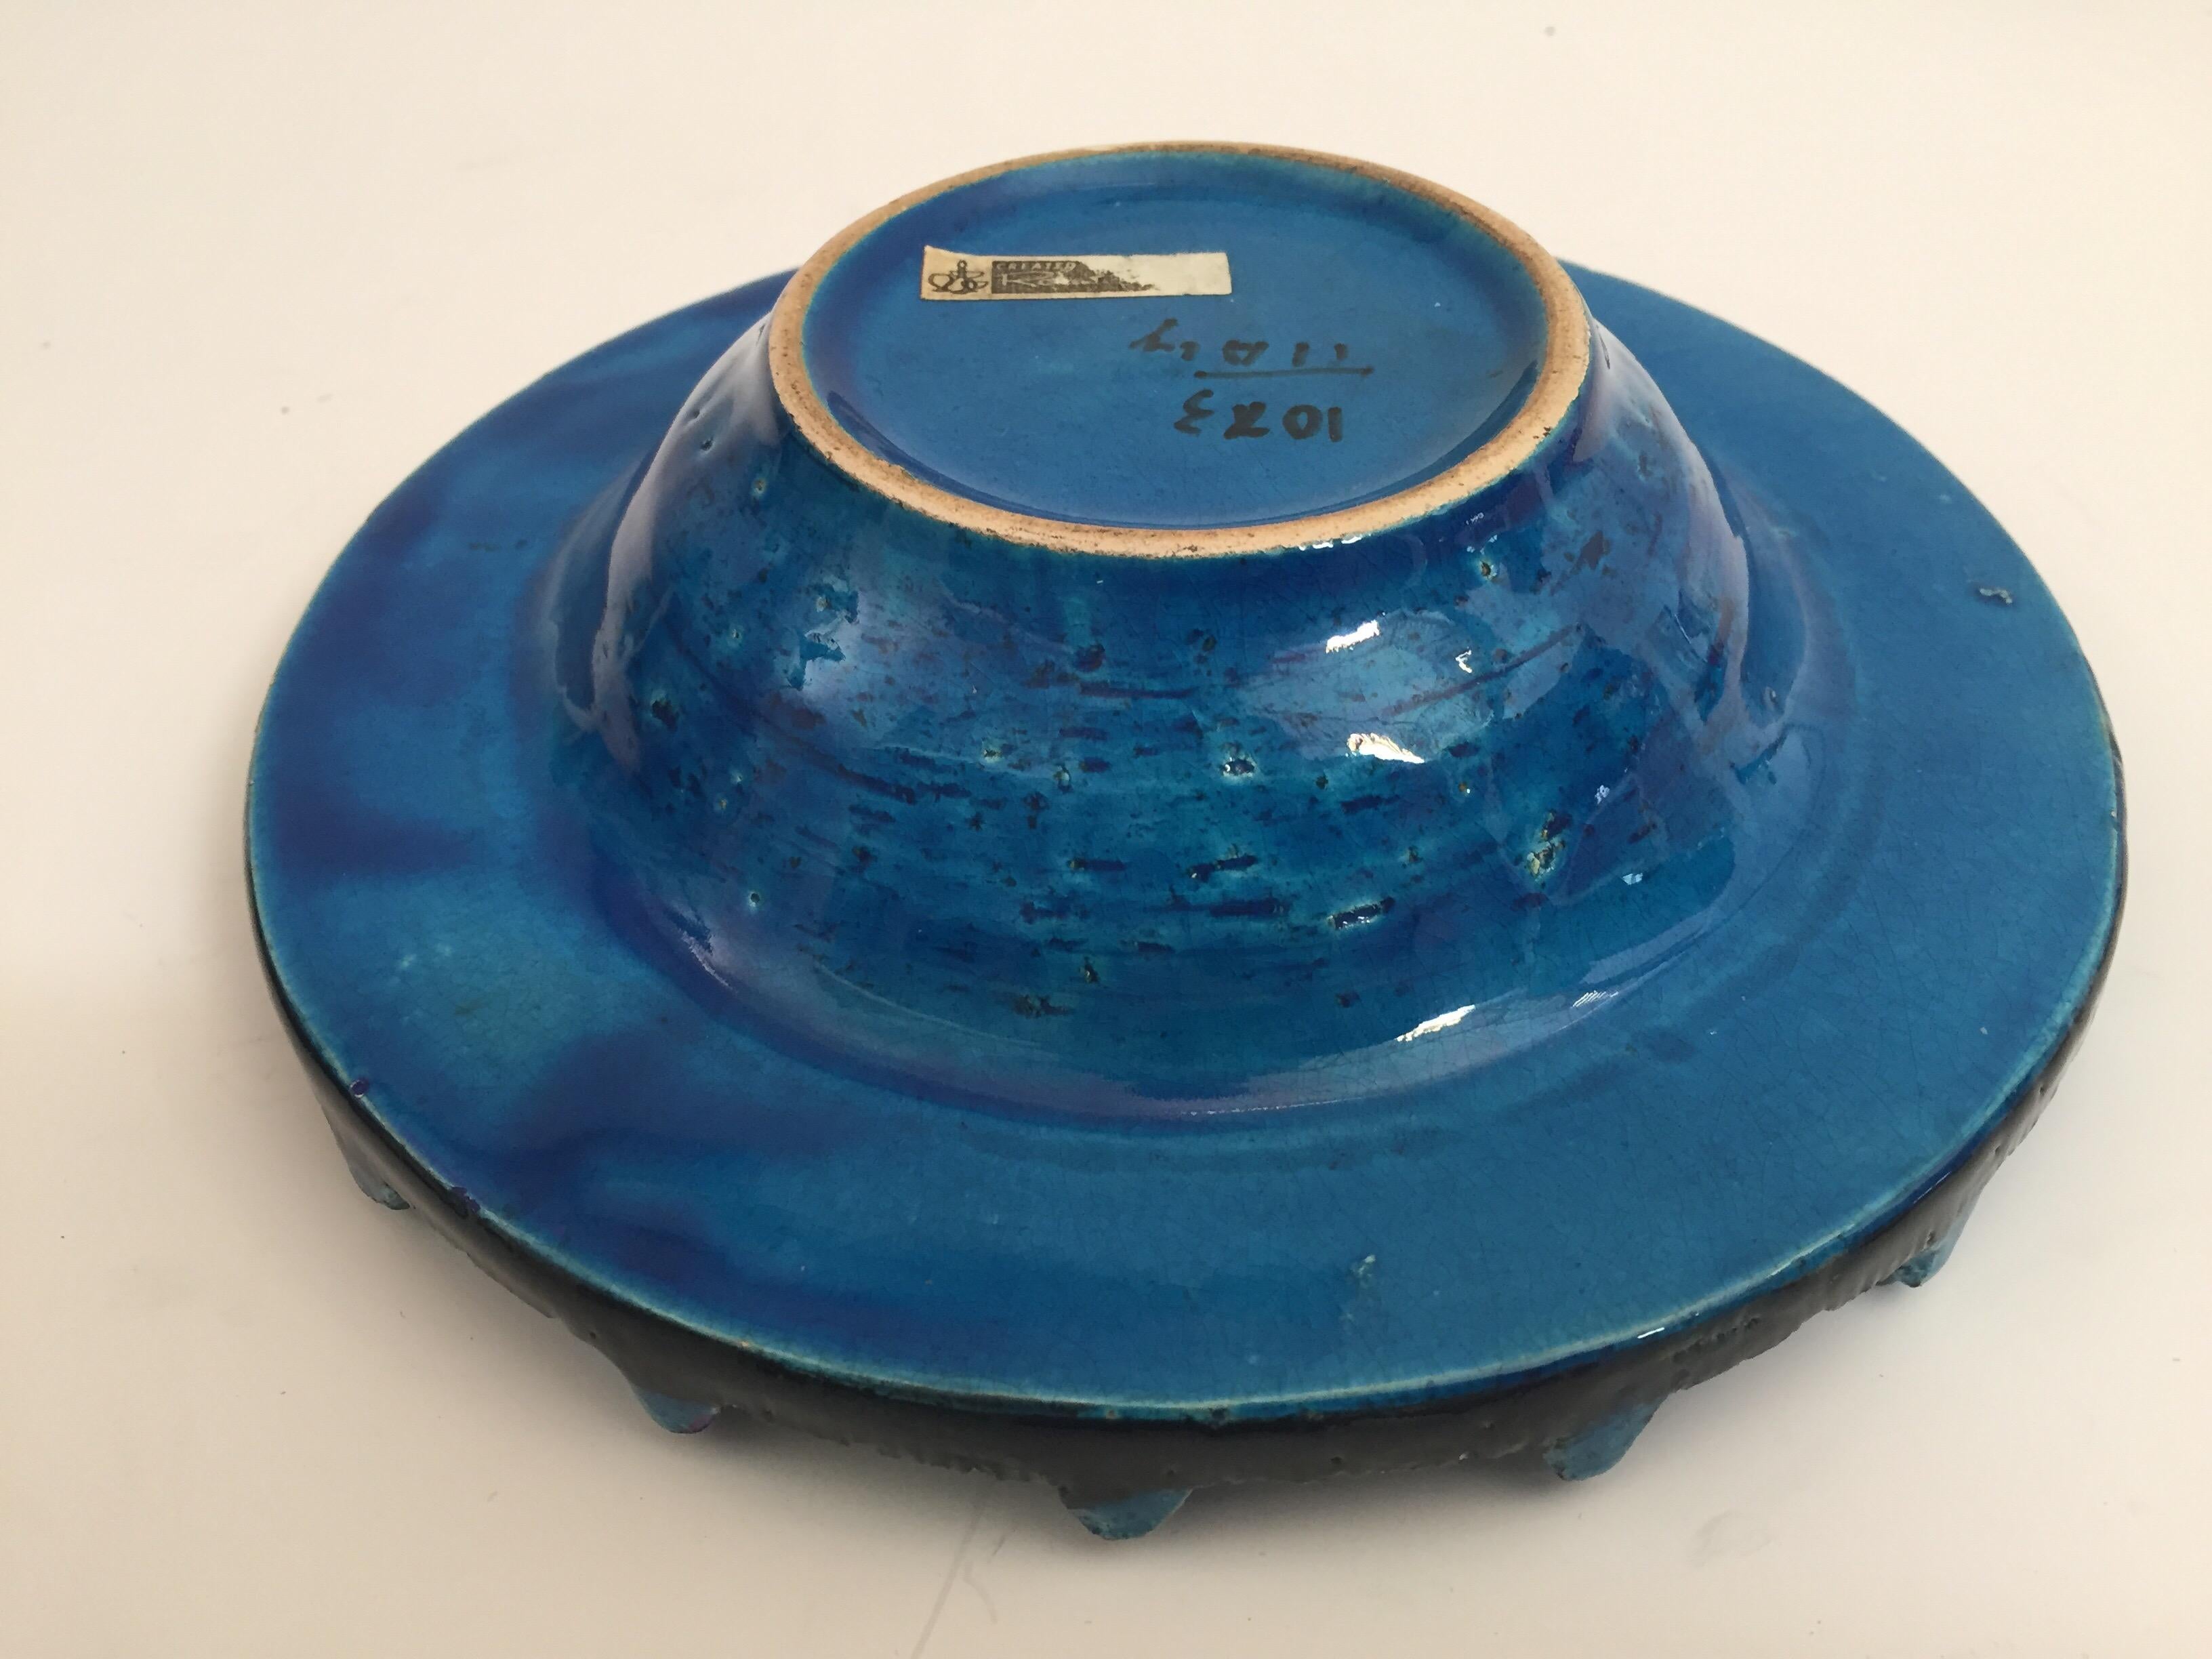 Vintage Blue Ceramic Ashtray Handcrafted in Italy by Aldo Londi 1950 For Sale 1